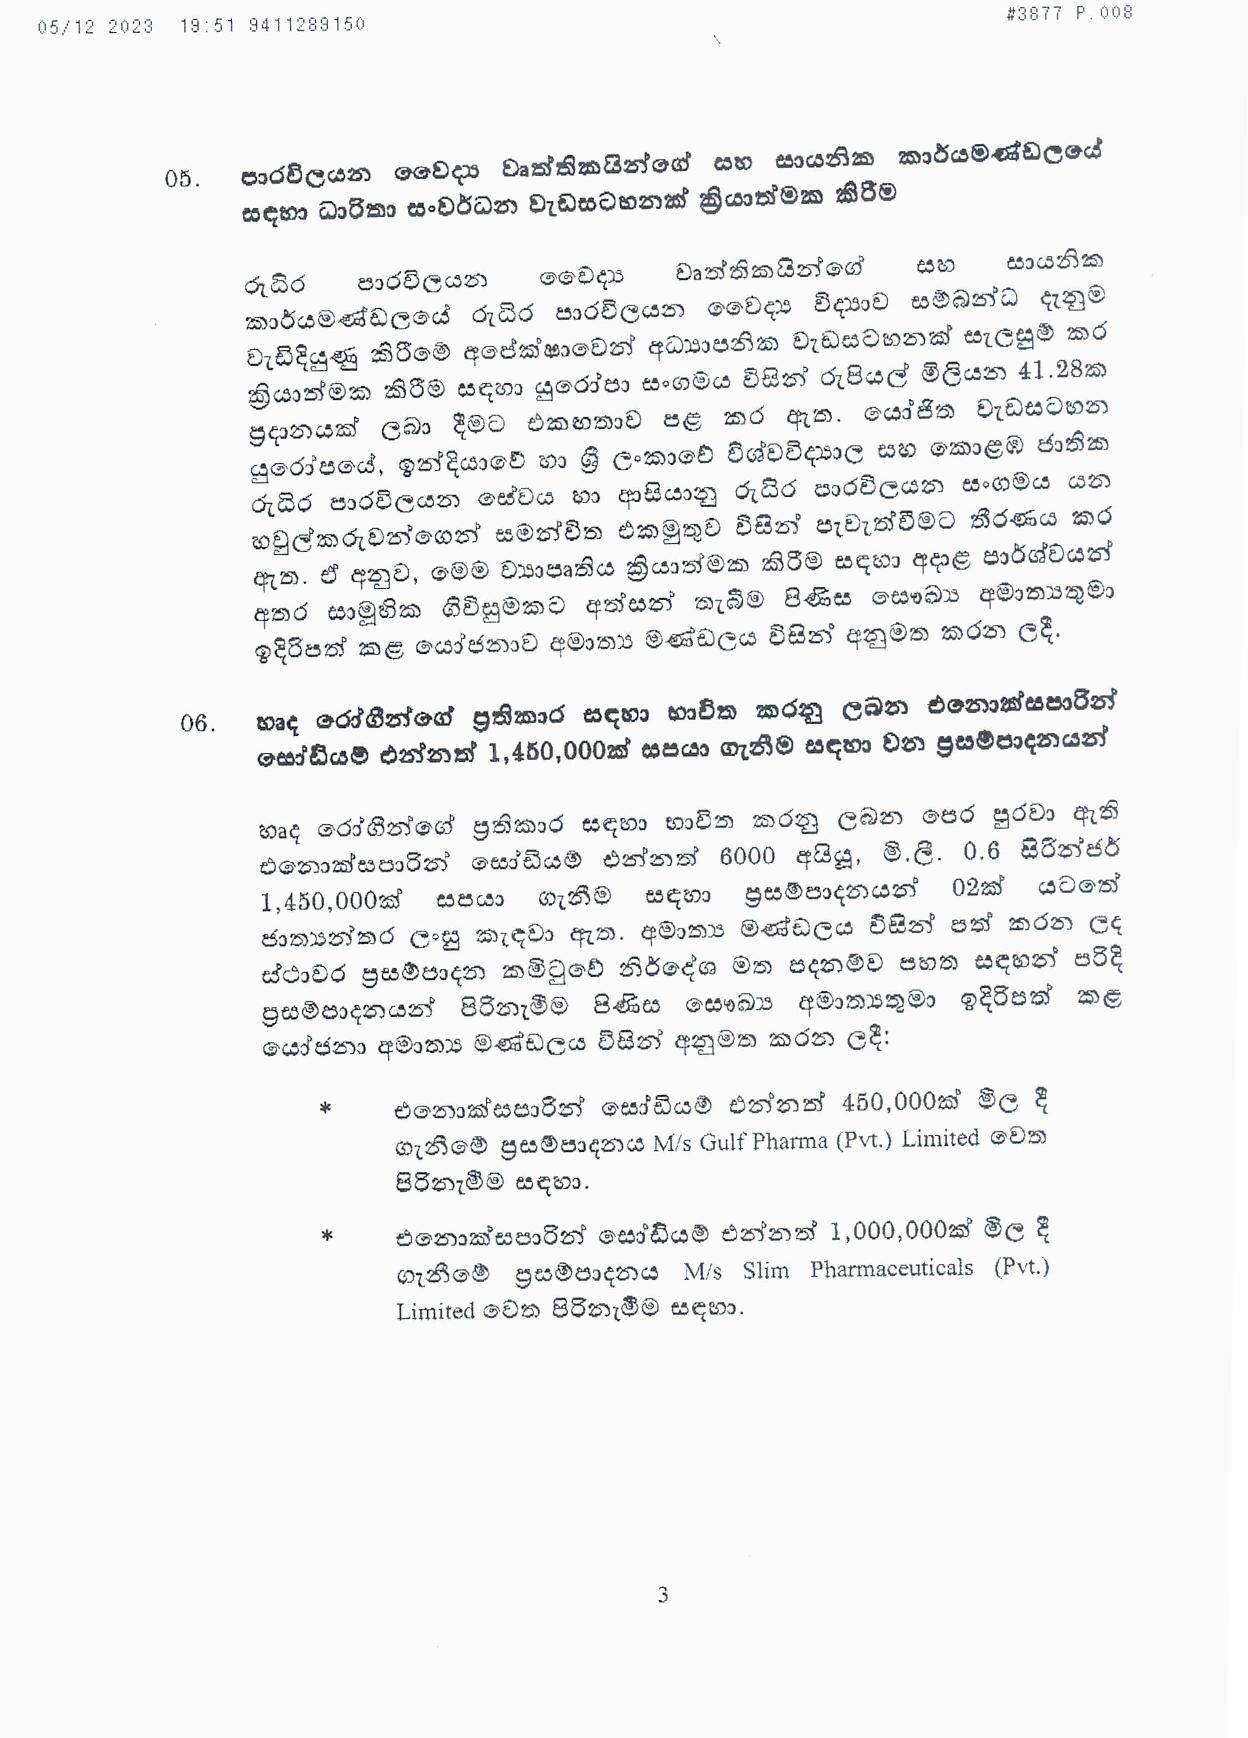 Cabinet Decision on 05.12.2023 page 003